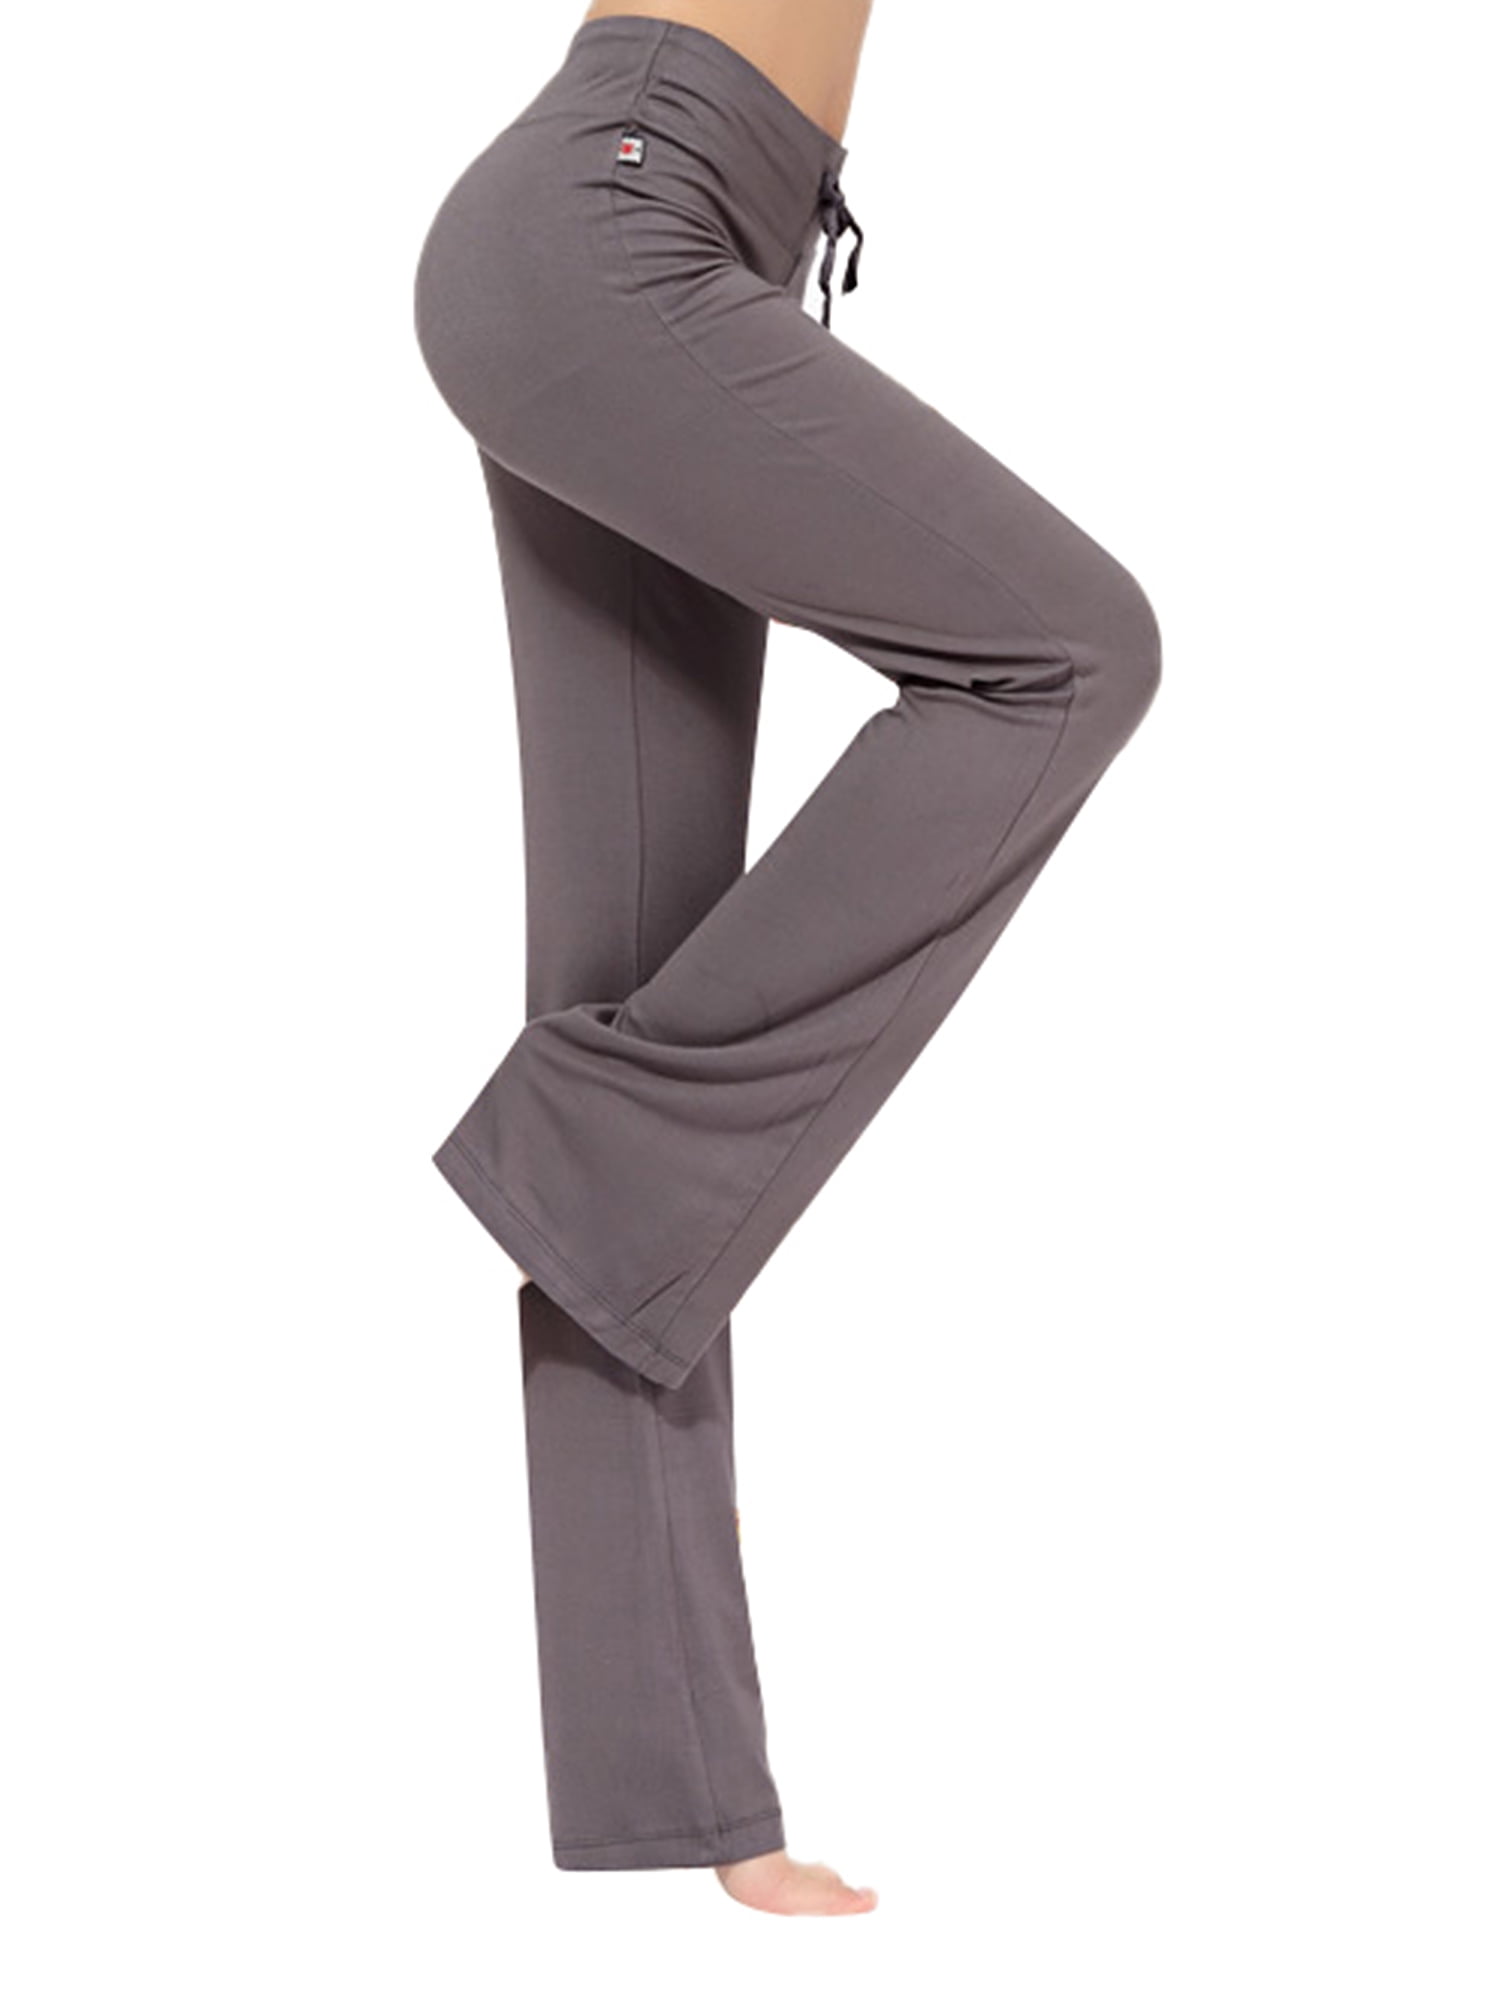 Buy Vetements Girl's Cotton Solid Ankle Legging Color Charcoal Grey Size  2XL at Amazon.in